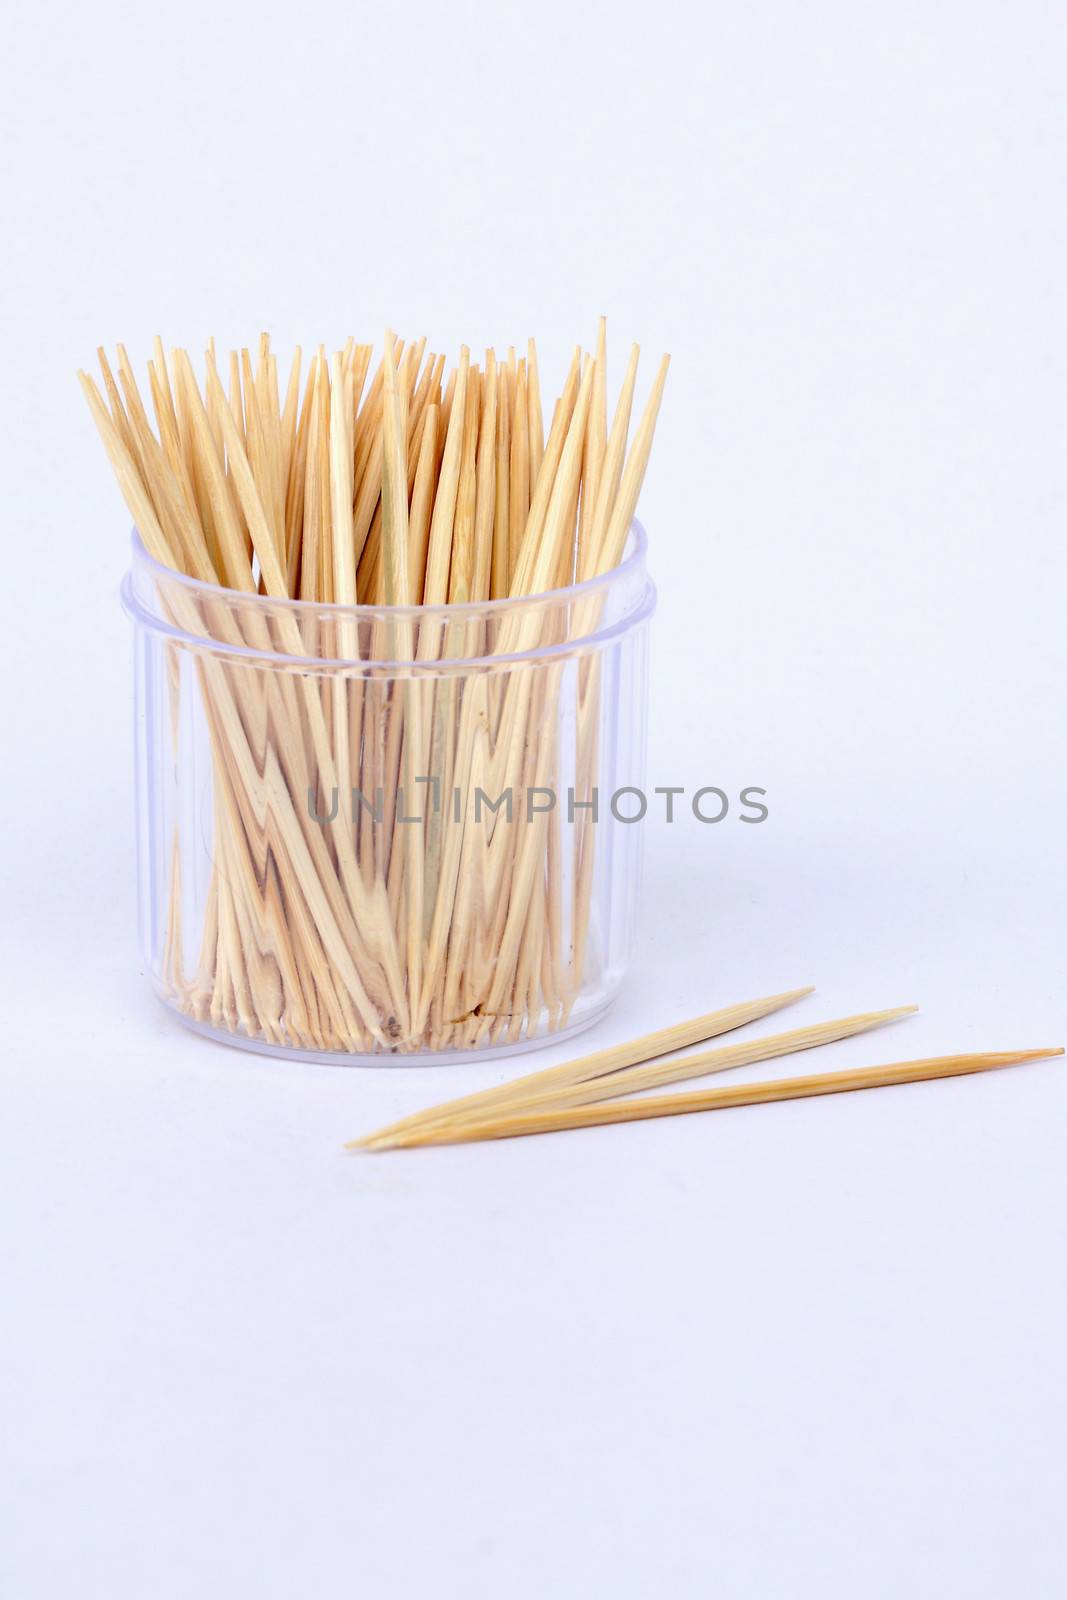 toothpicks in the bank on a white background